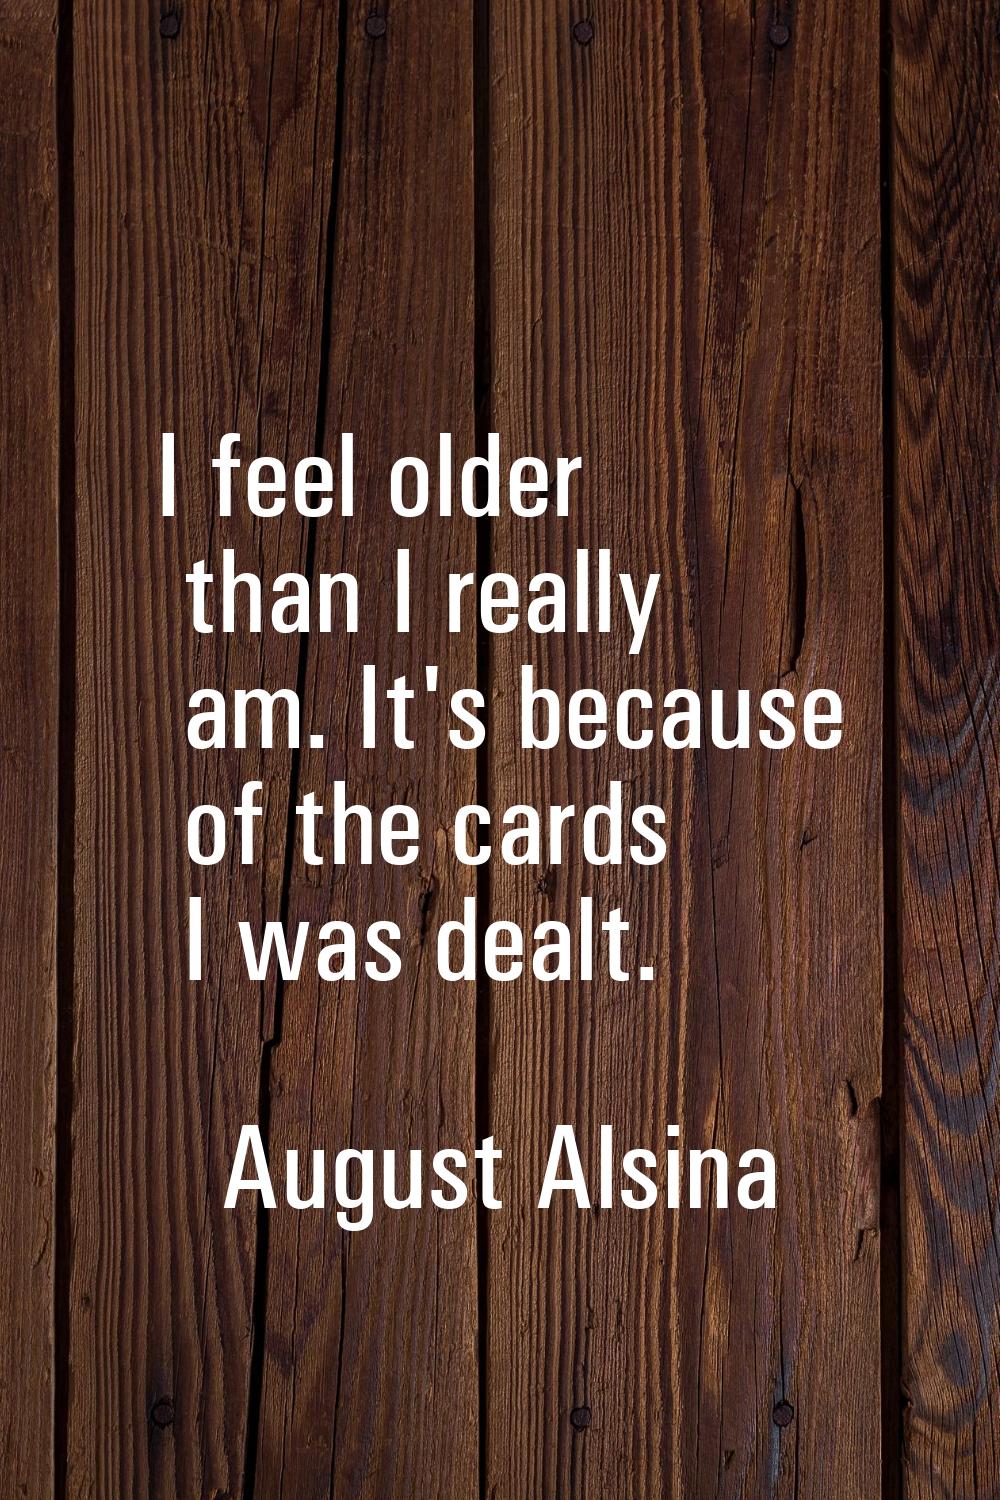 I feel older than I really am. It's because of the cards I was dealt.